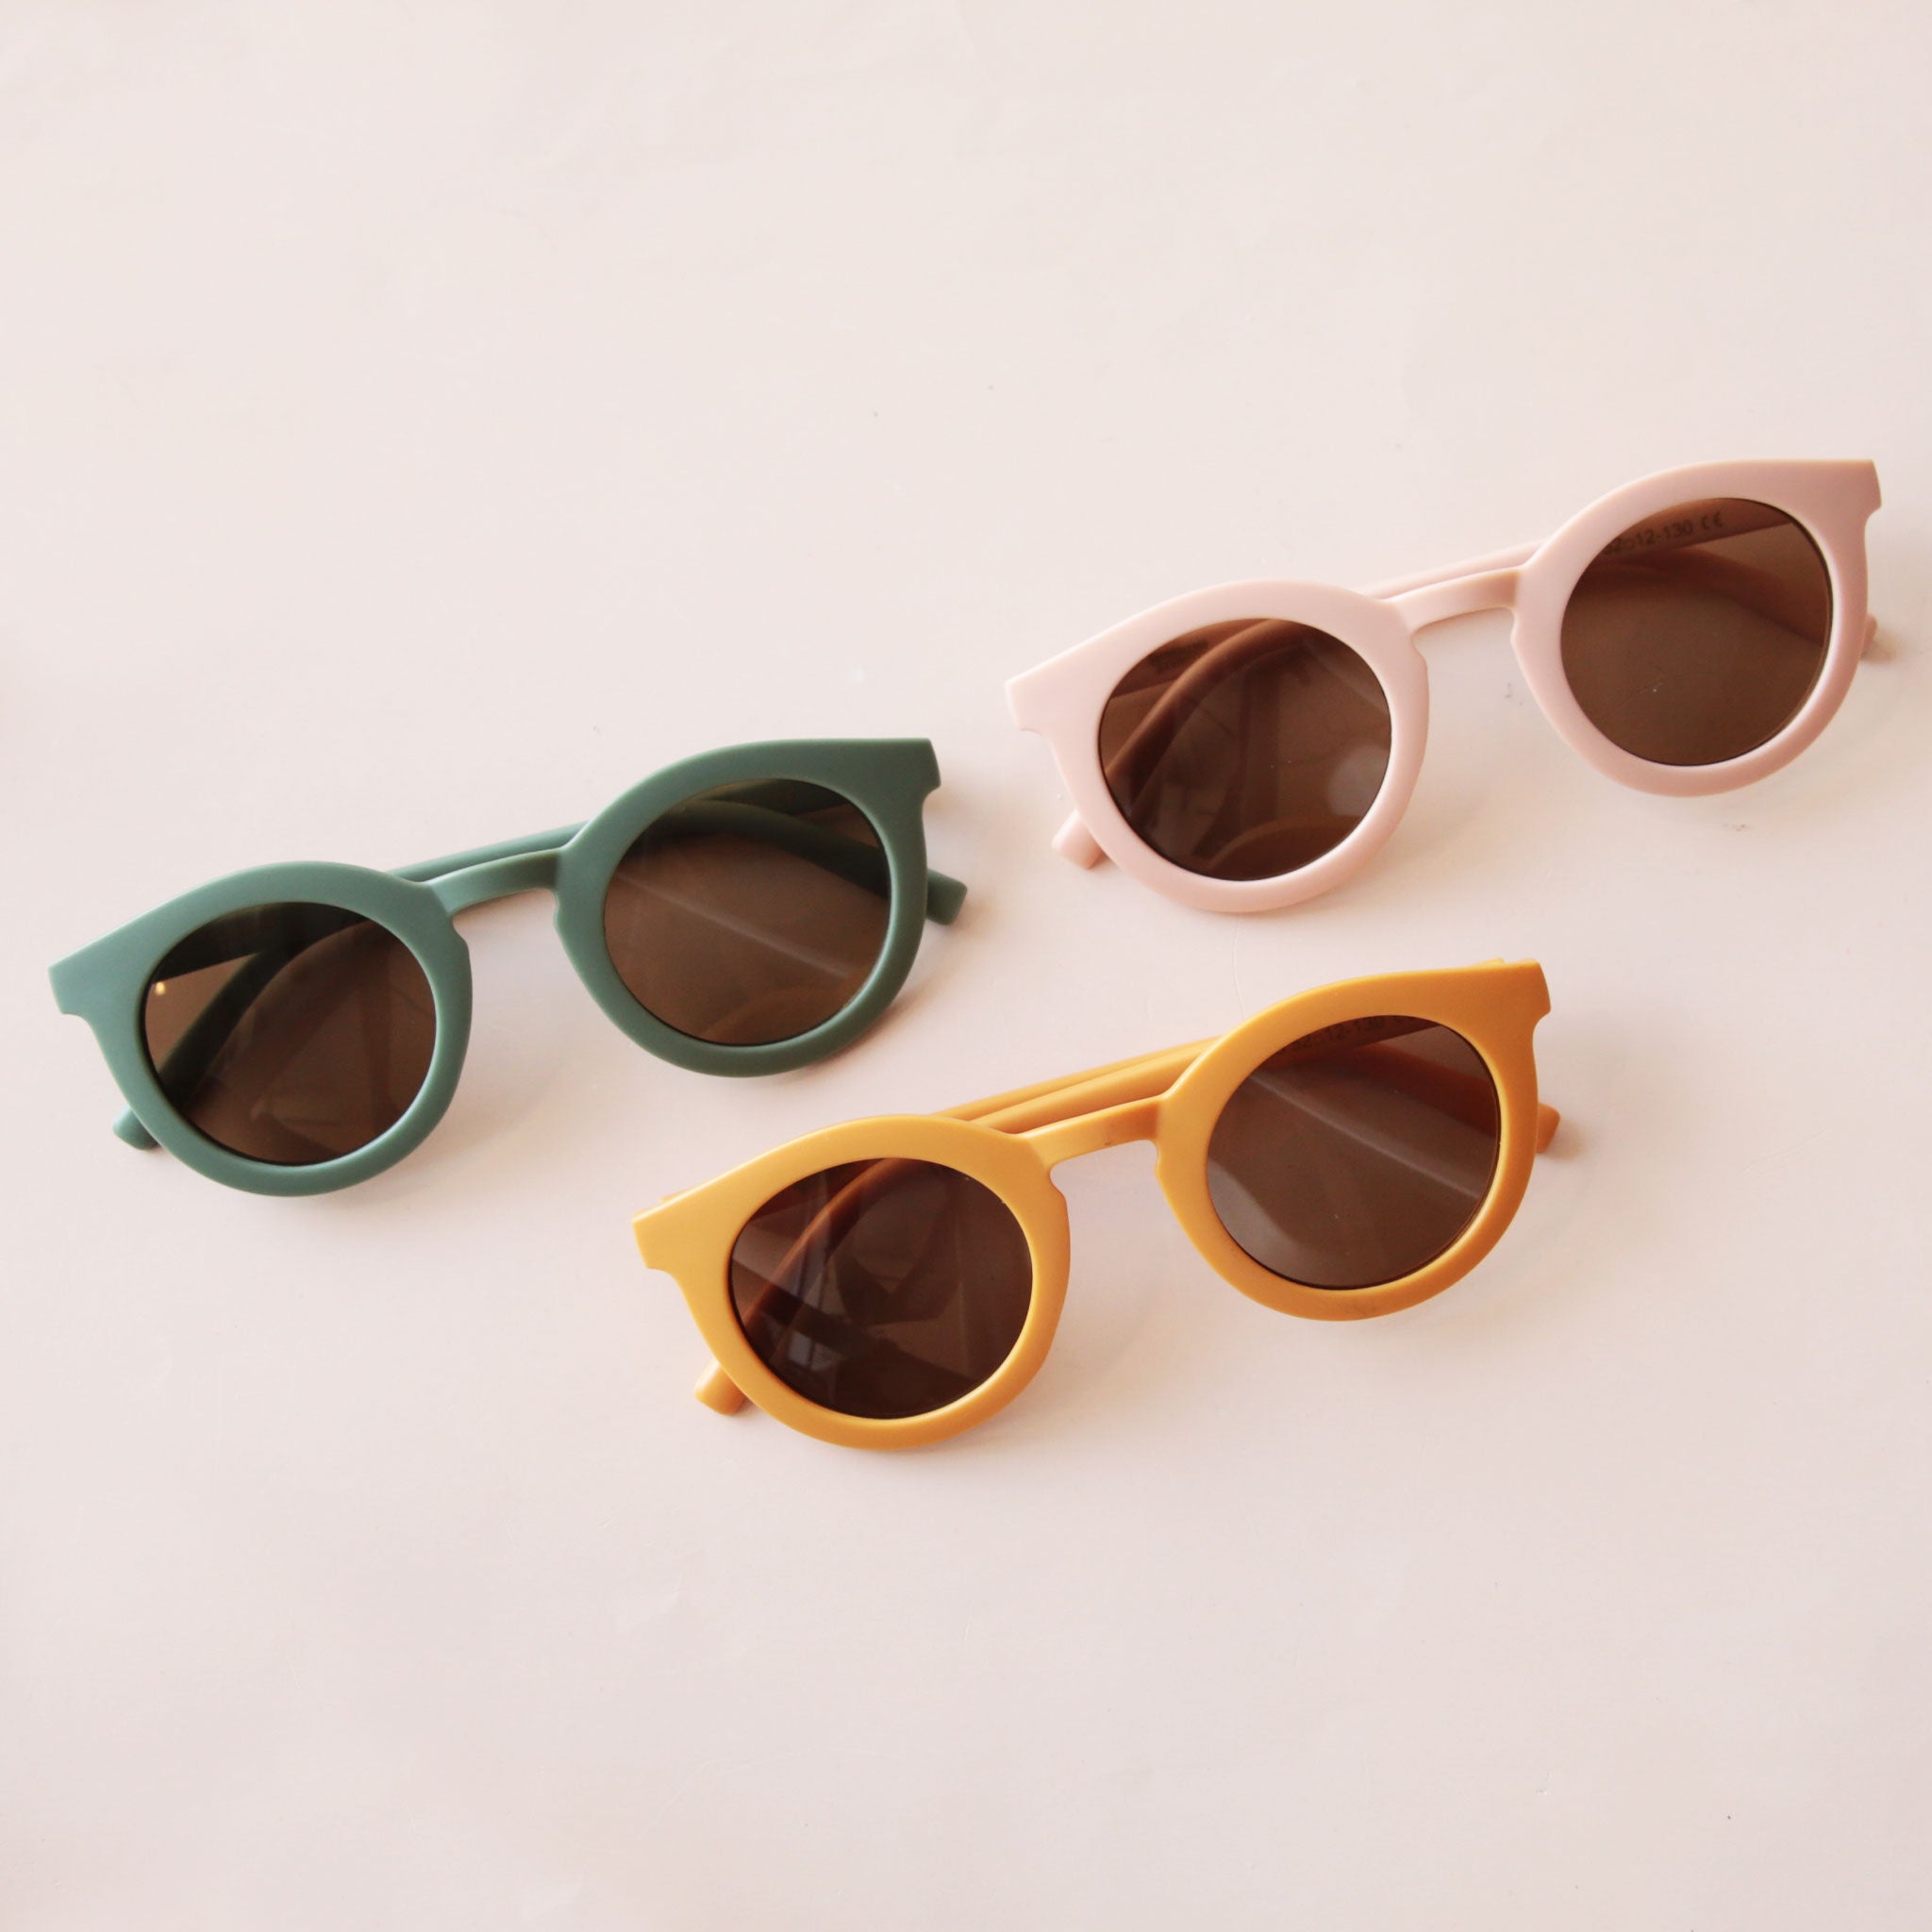 On a neutral background is three different colored circle children's sunglasses in a green, light pink and yellow shade.